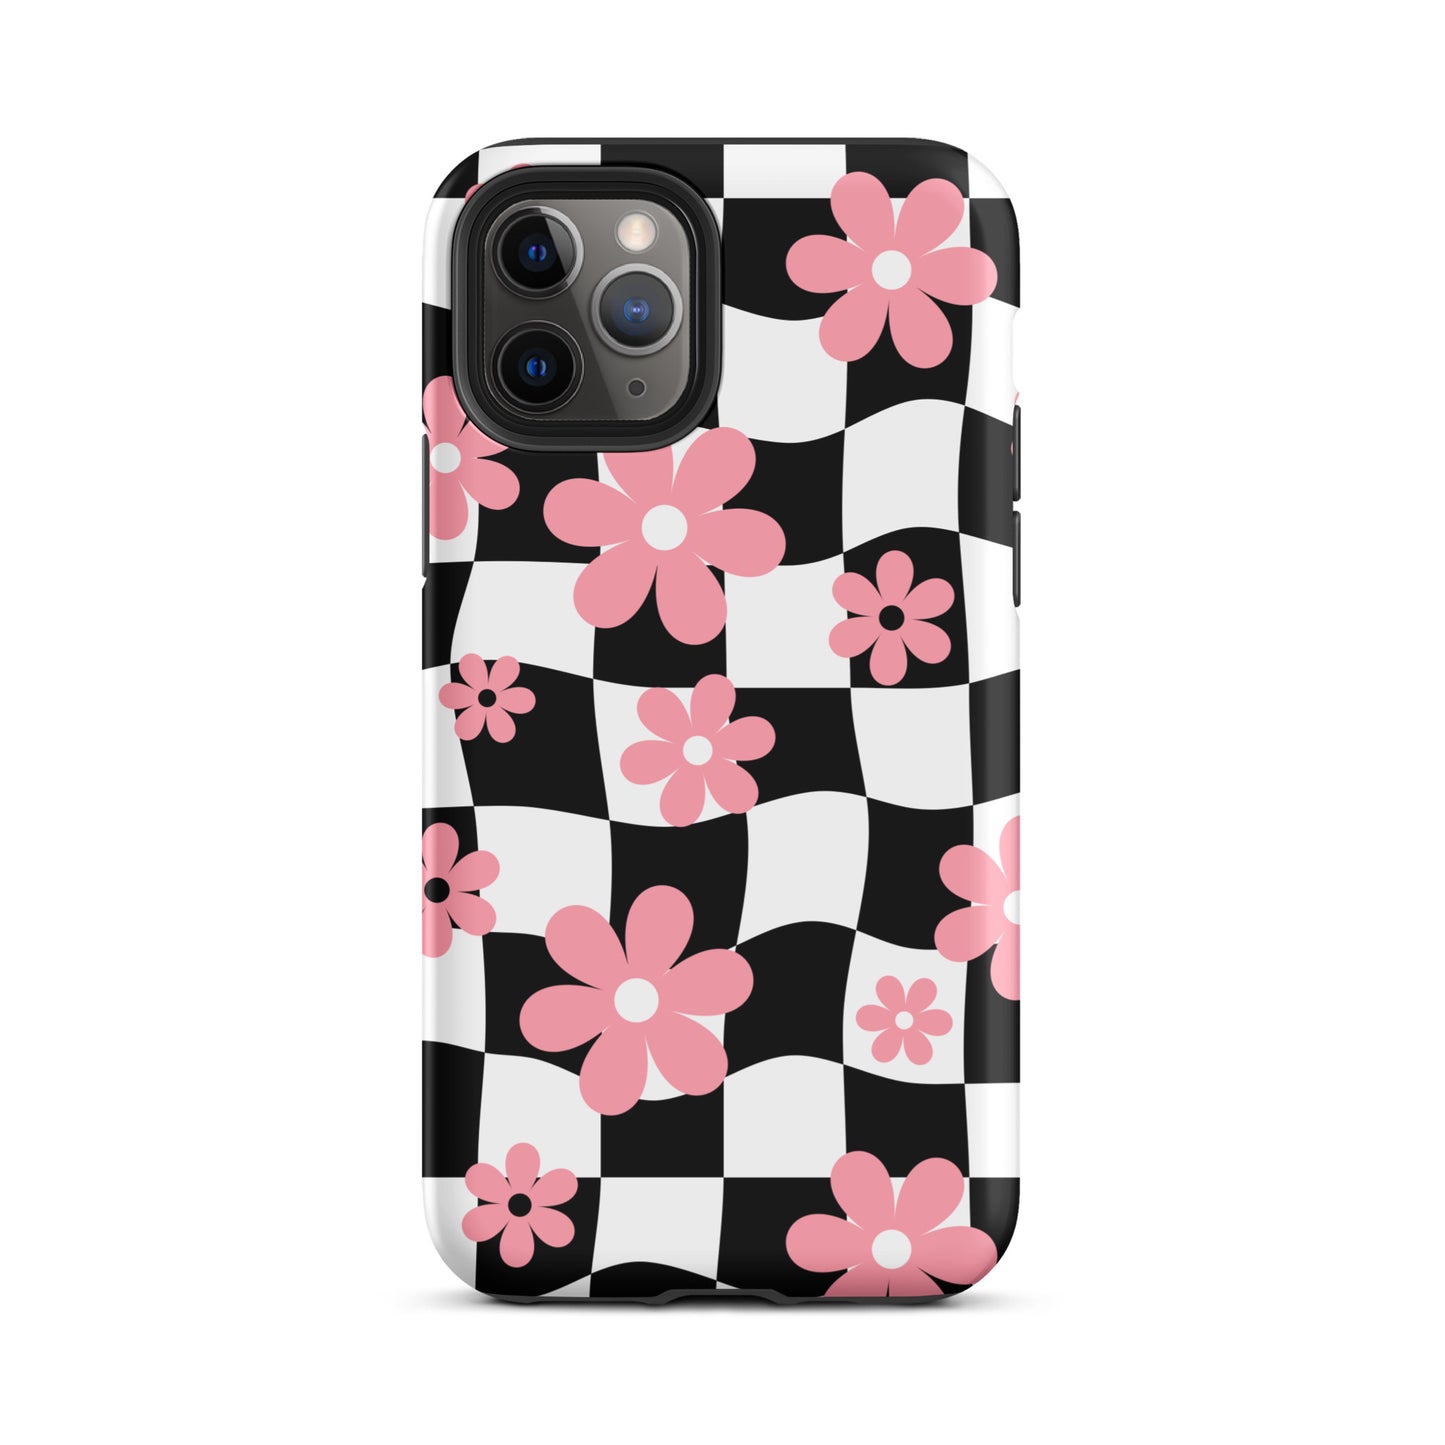 Floral Wavy Checkered iPhone Case iPhone 11 Pro Matte